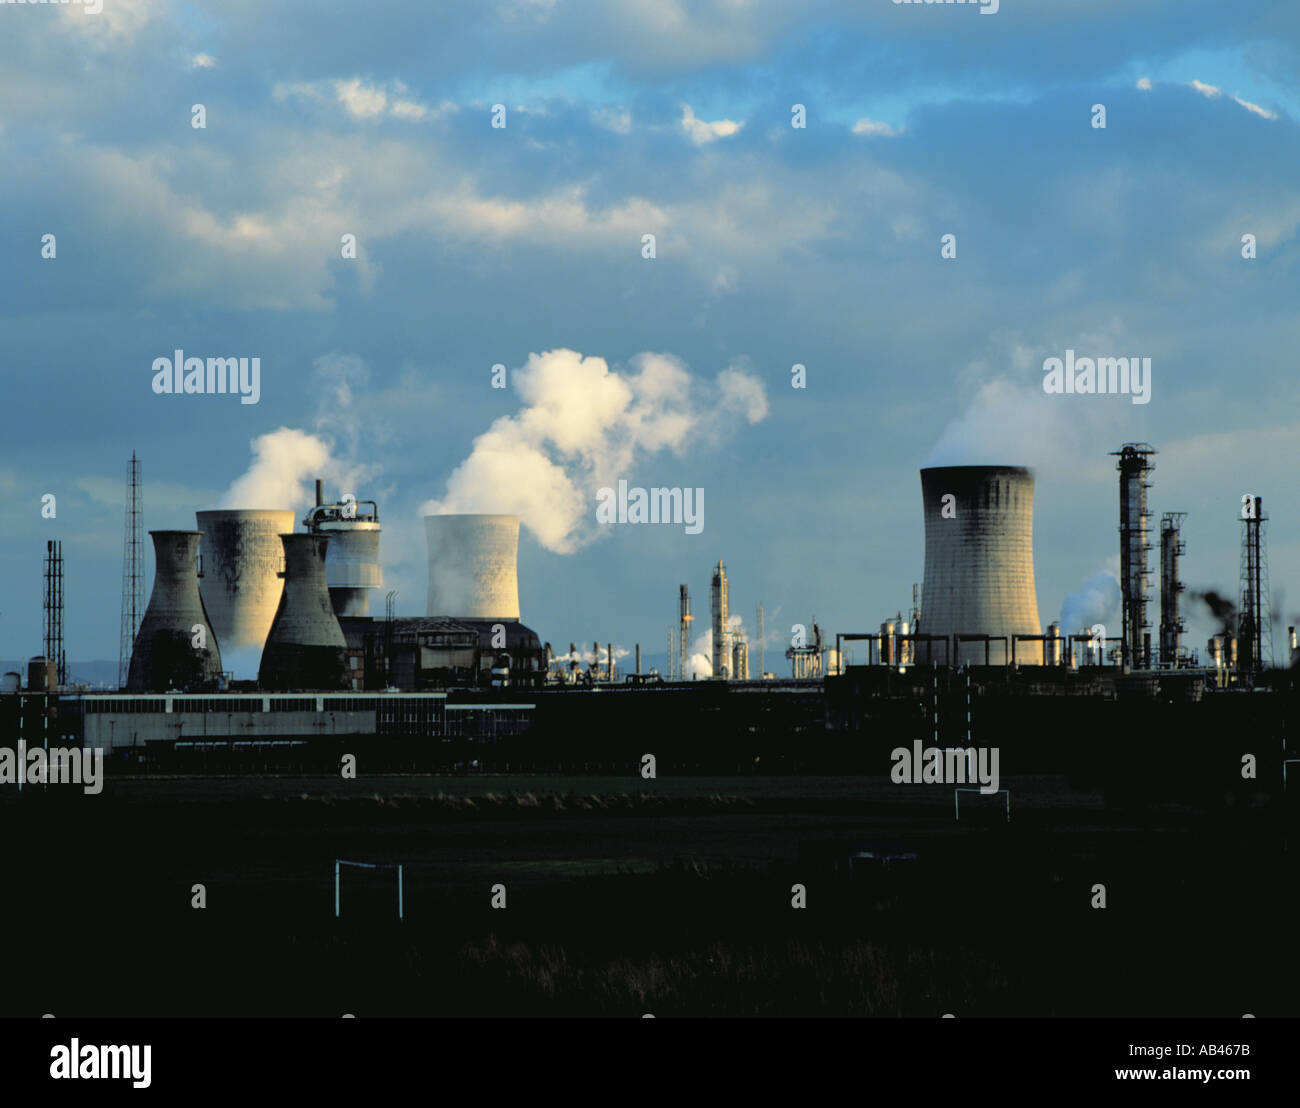 Chemical complex and cooling towers seen over playing fields, Billingham, Teesside, Cleveland, England, UK. in the 1980s Stock Photo